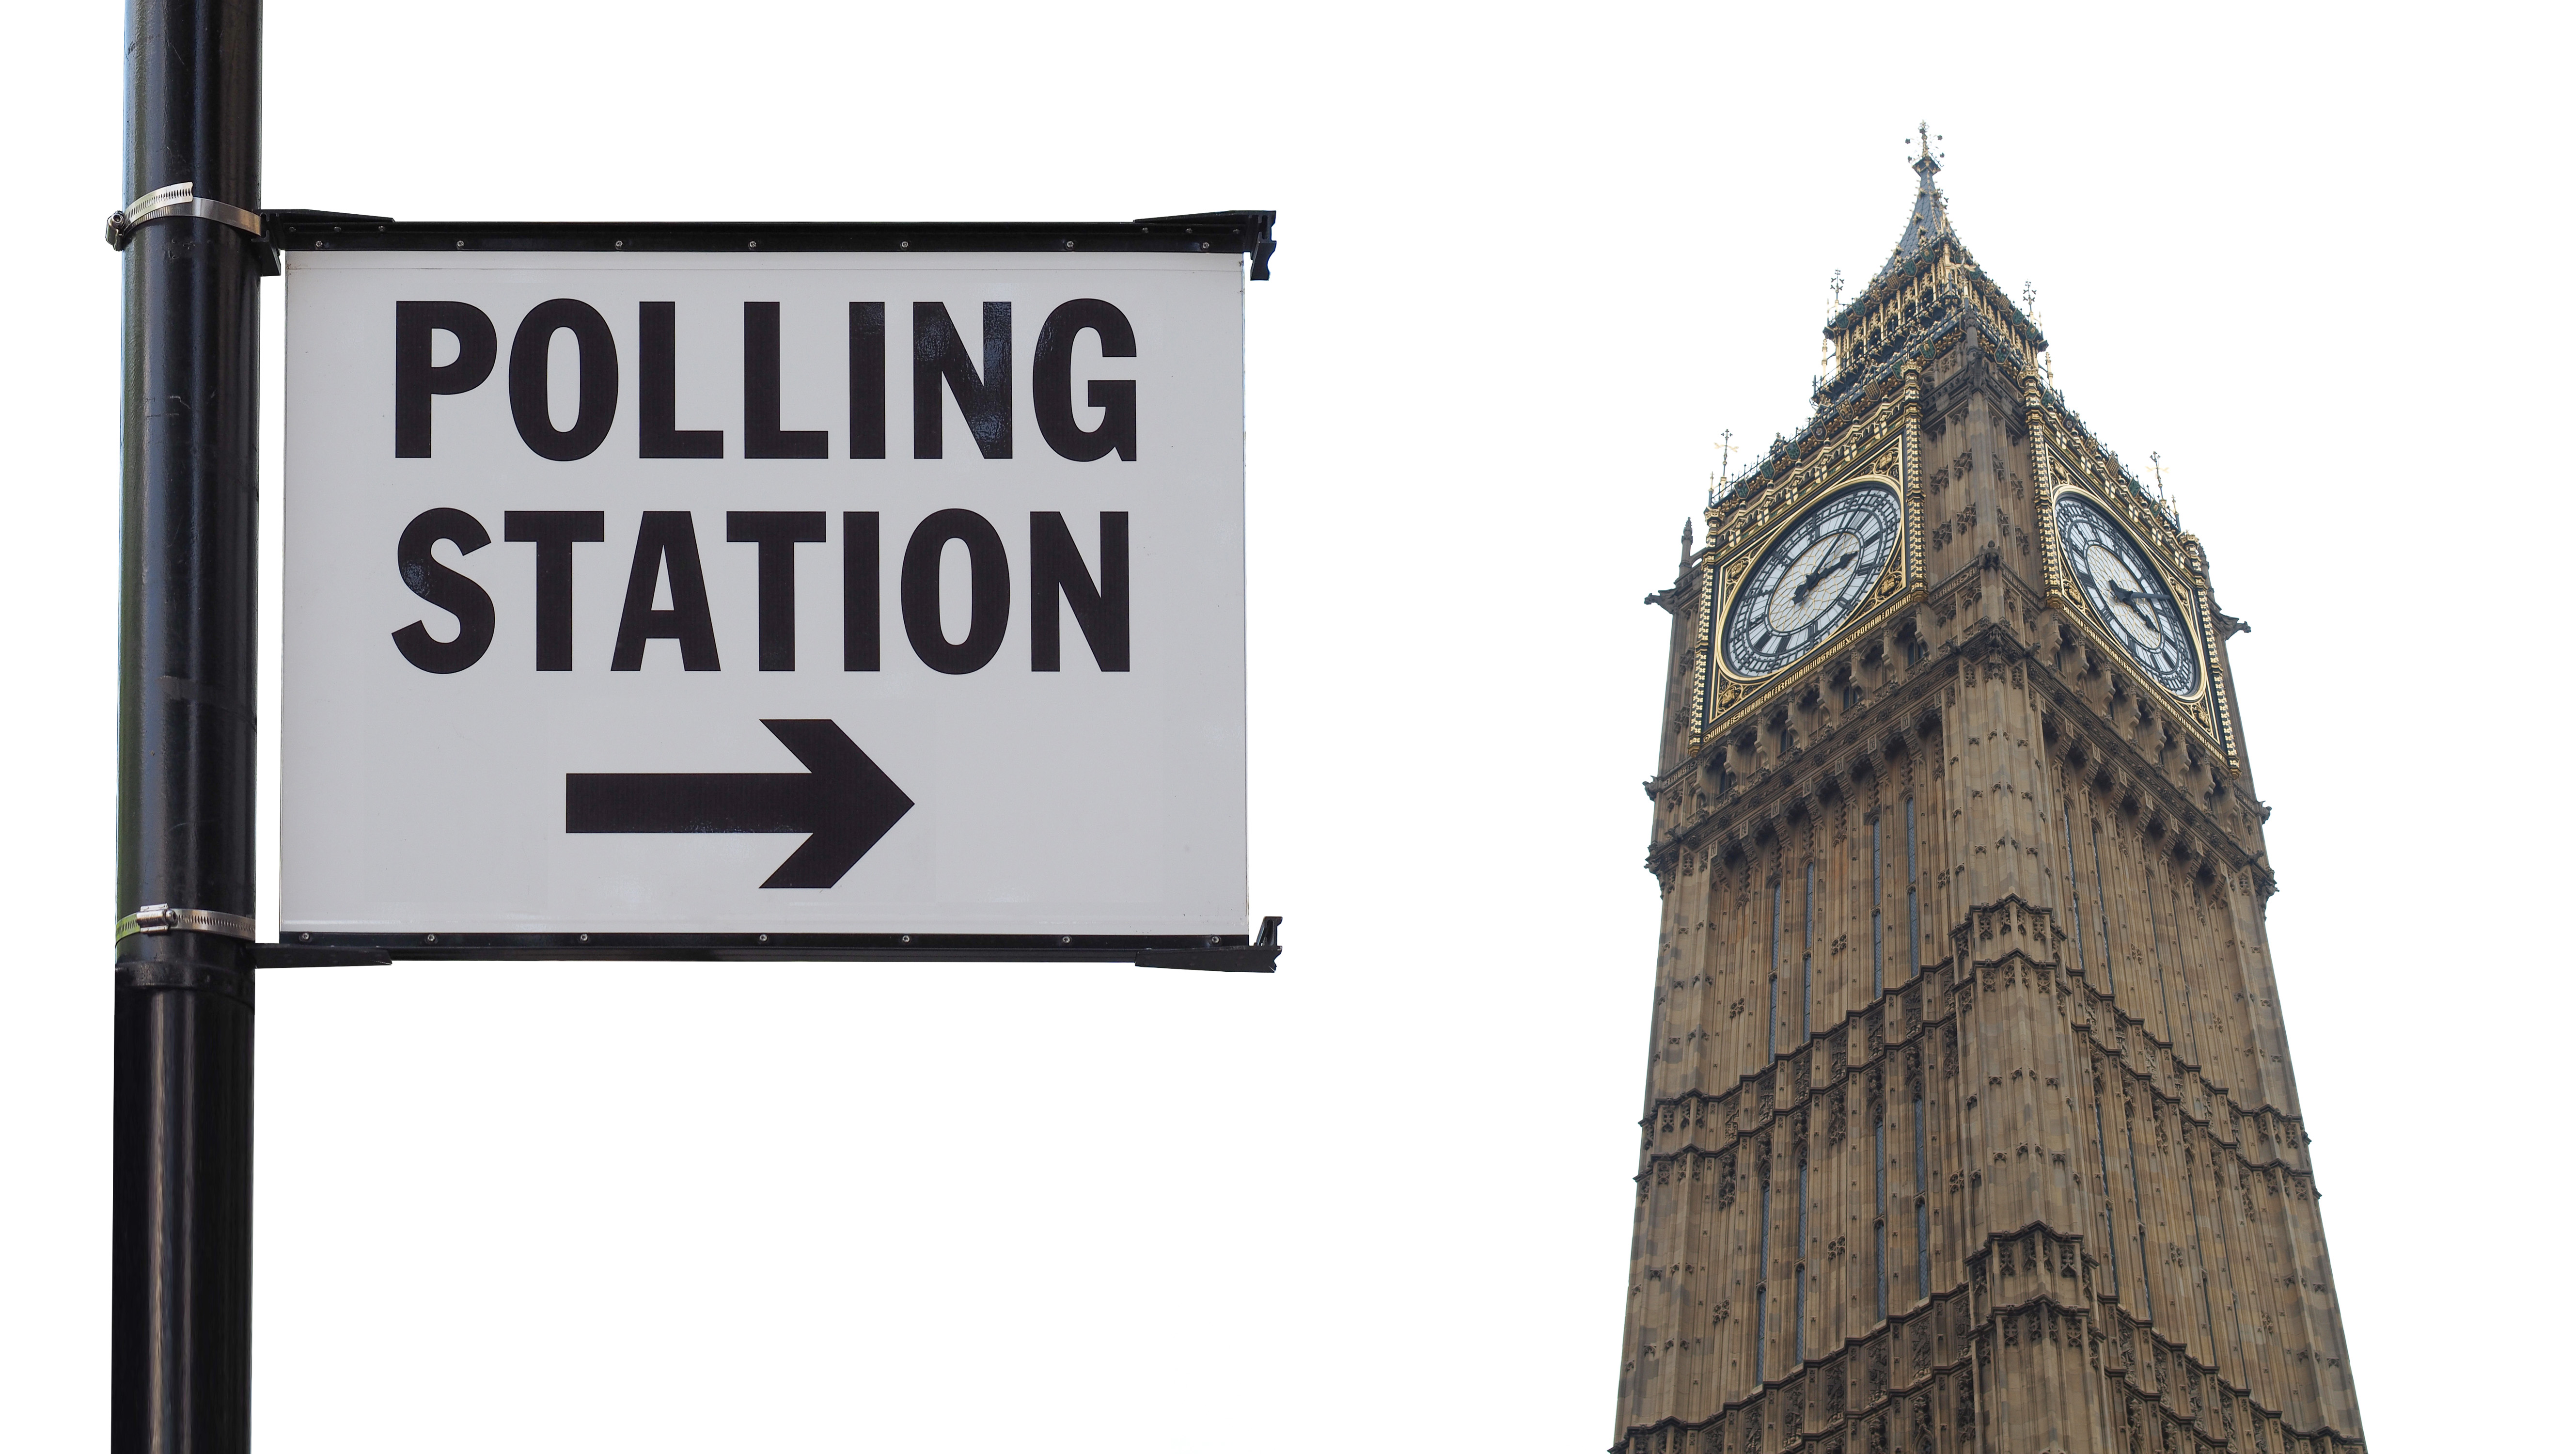 Polling station sign against the Elizabeth Tower and a cloudy sky